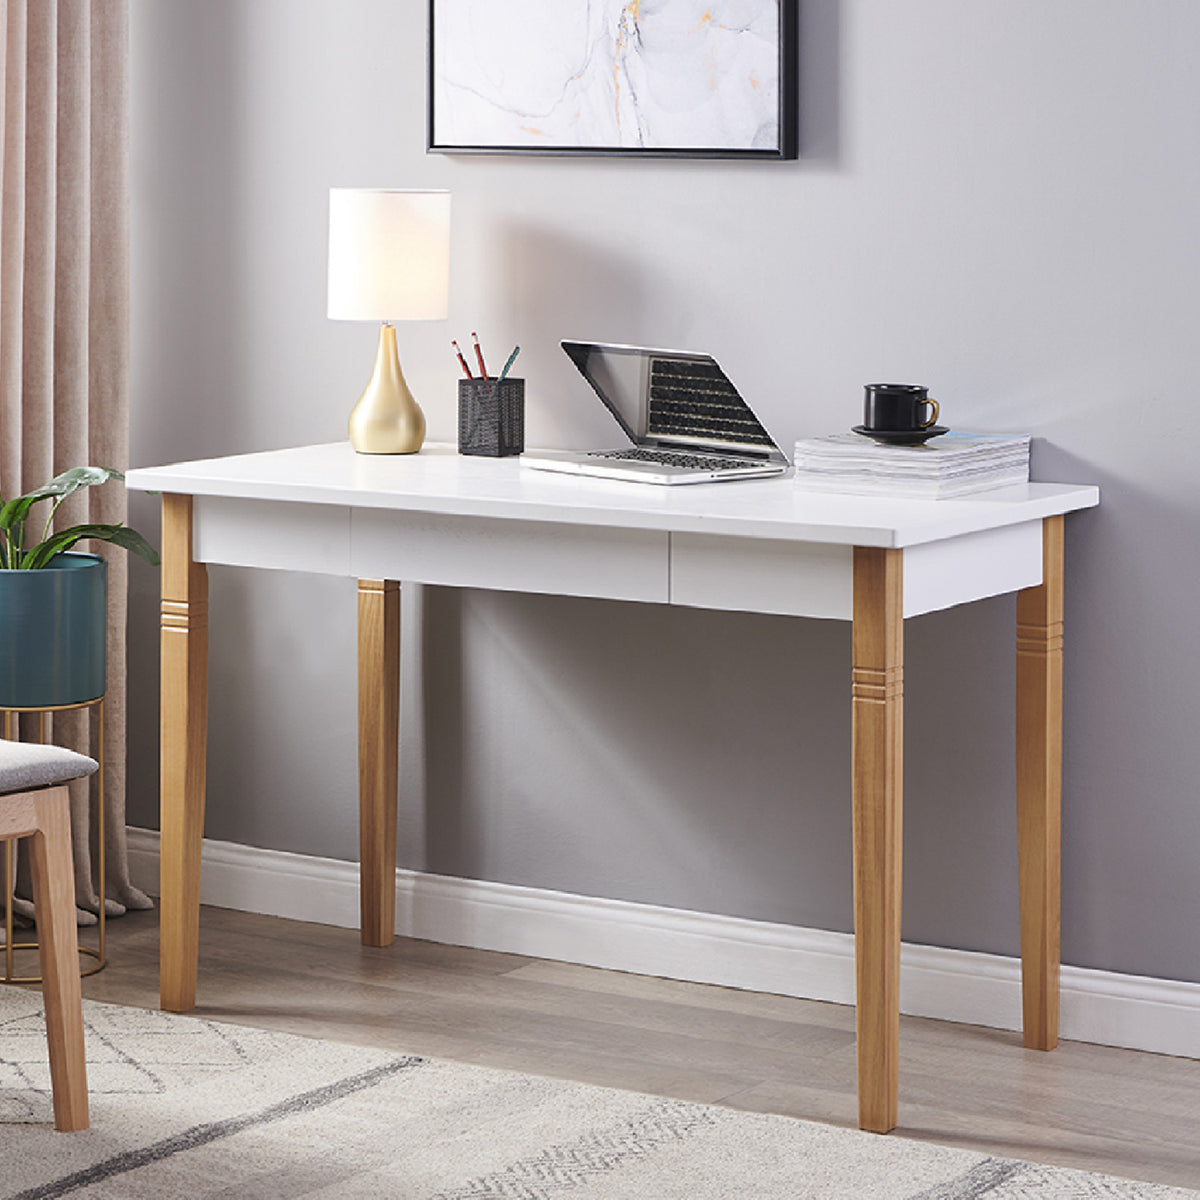 Home Office Desk Computer with Solid Wood Legs & 1 Drawer - White + Wood